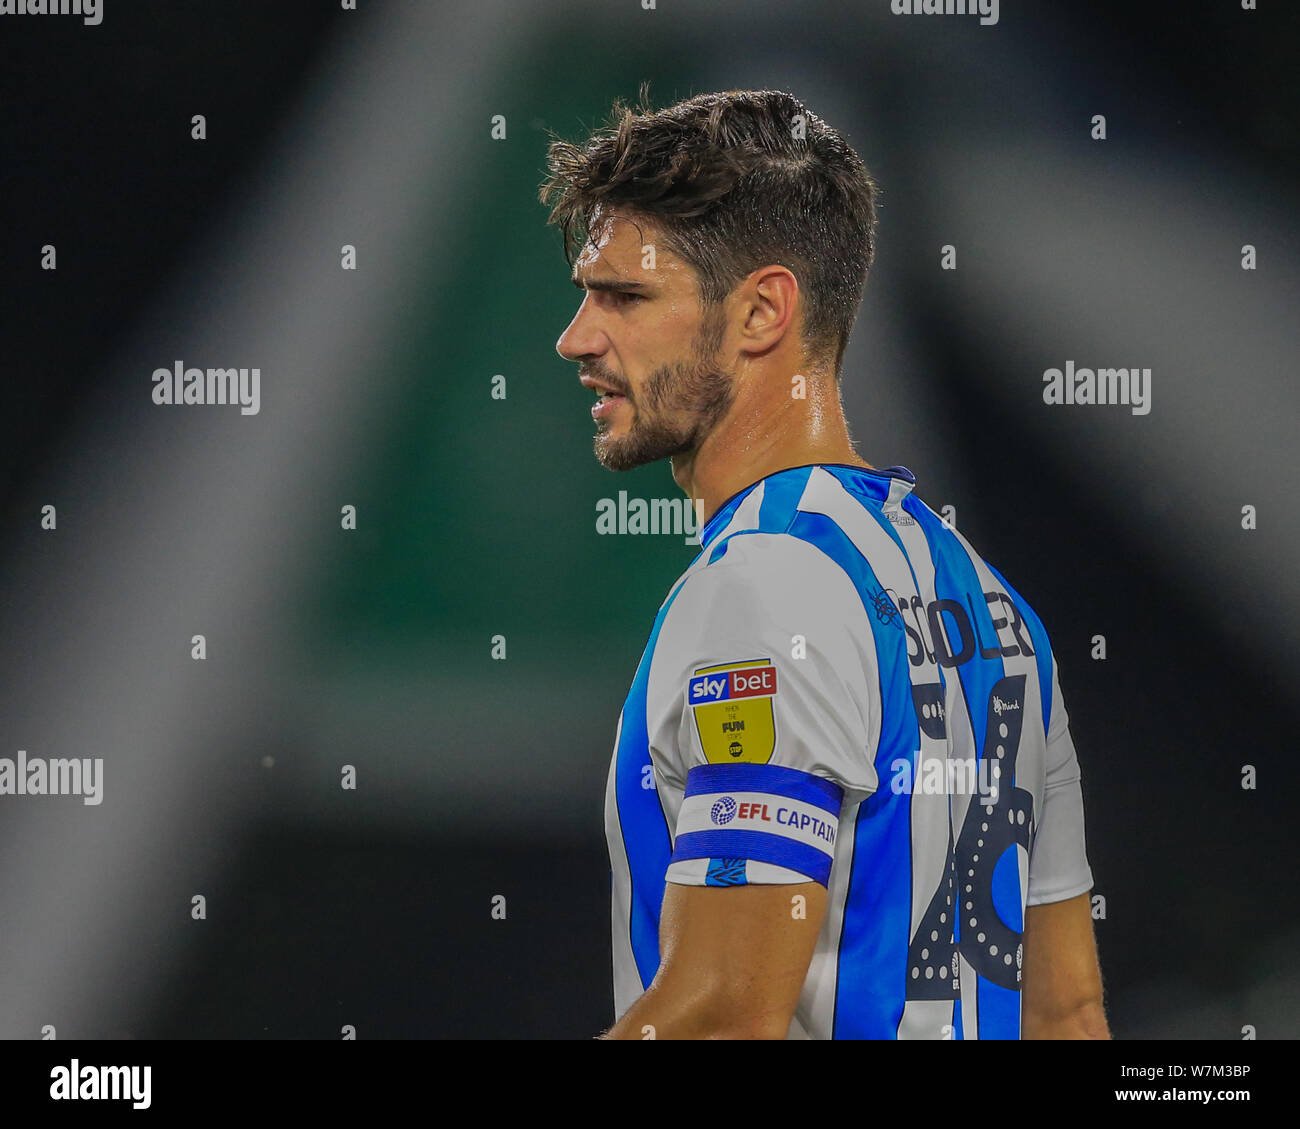 5th August 2019, John Smiths Stadium, Huddersfield England; Sky Bet Championship, Huddersfield Town vs Derby County ; Christopher Schindler (26) of Huddersfield Town during the game  Credit: Mark Cosgrove/News Images  English Football League images are subject to DataCo Licence Stock Photo